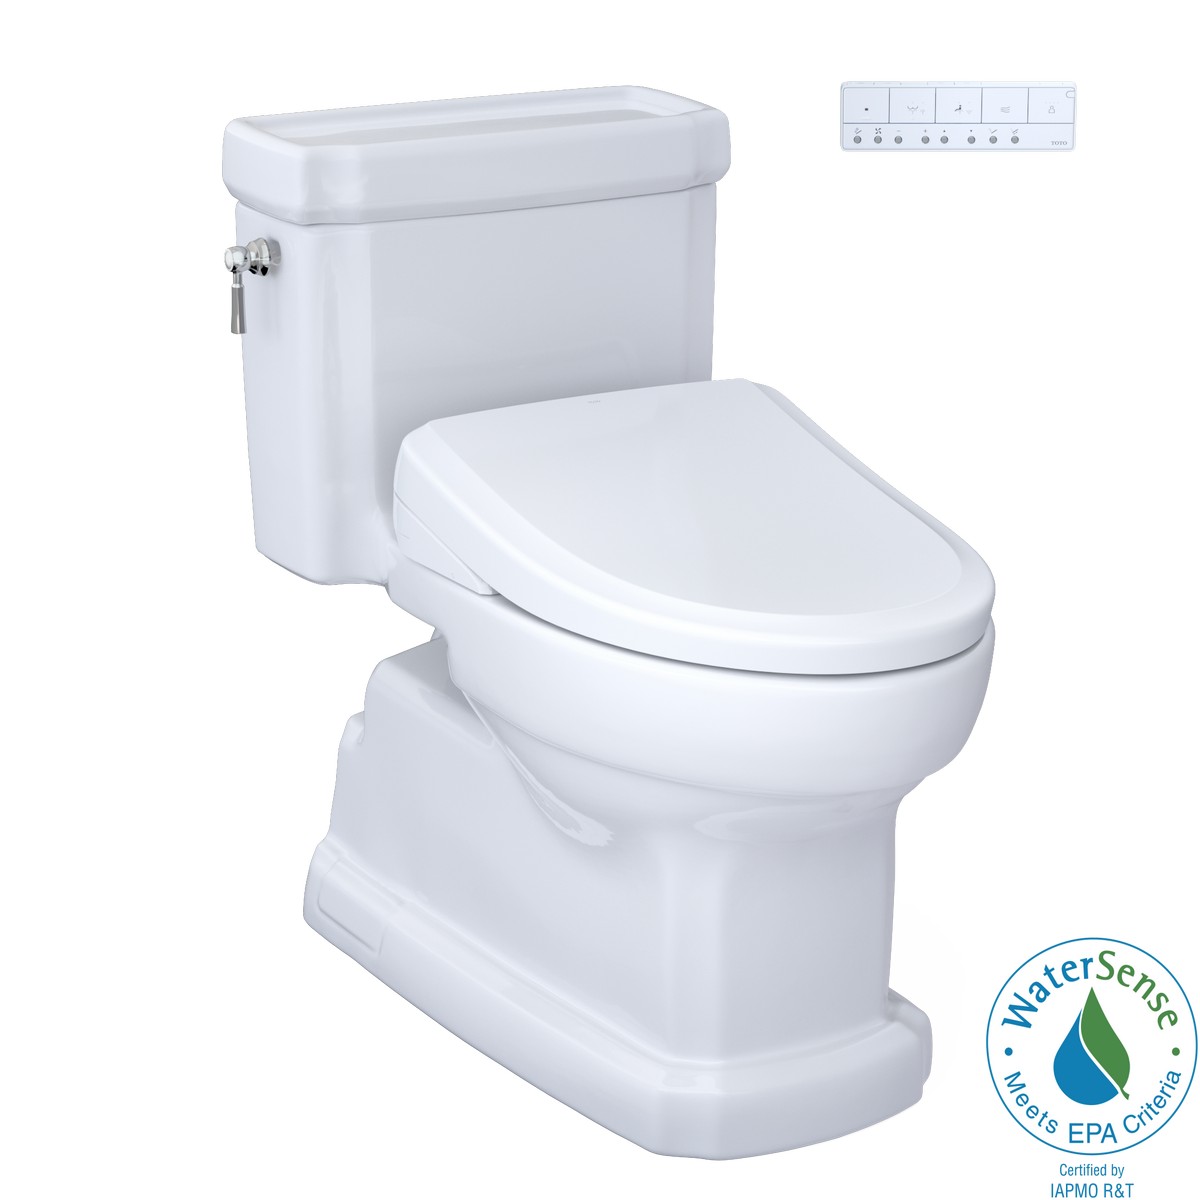 TOTO MW9744734CEF#01 WASHLET+ ECO GUINEVERE 1.28 GPF ELONGATED UNIVERSAL HEIGHT TOILET WITH WASHLET S7A BIDET SEAT IN COTTON WHITE